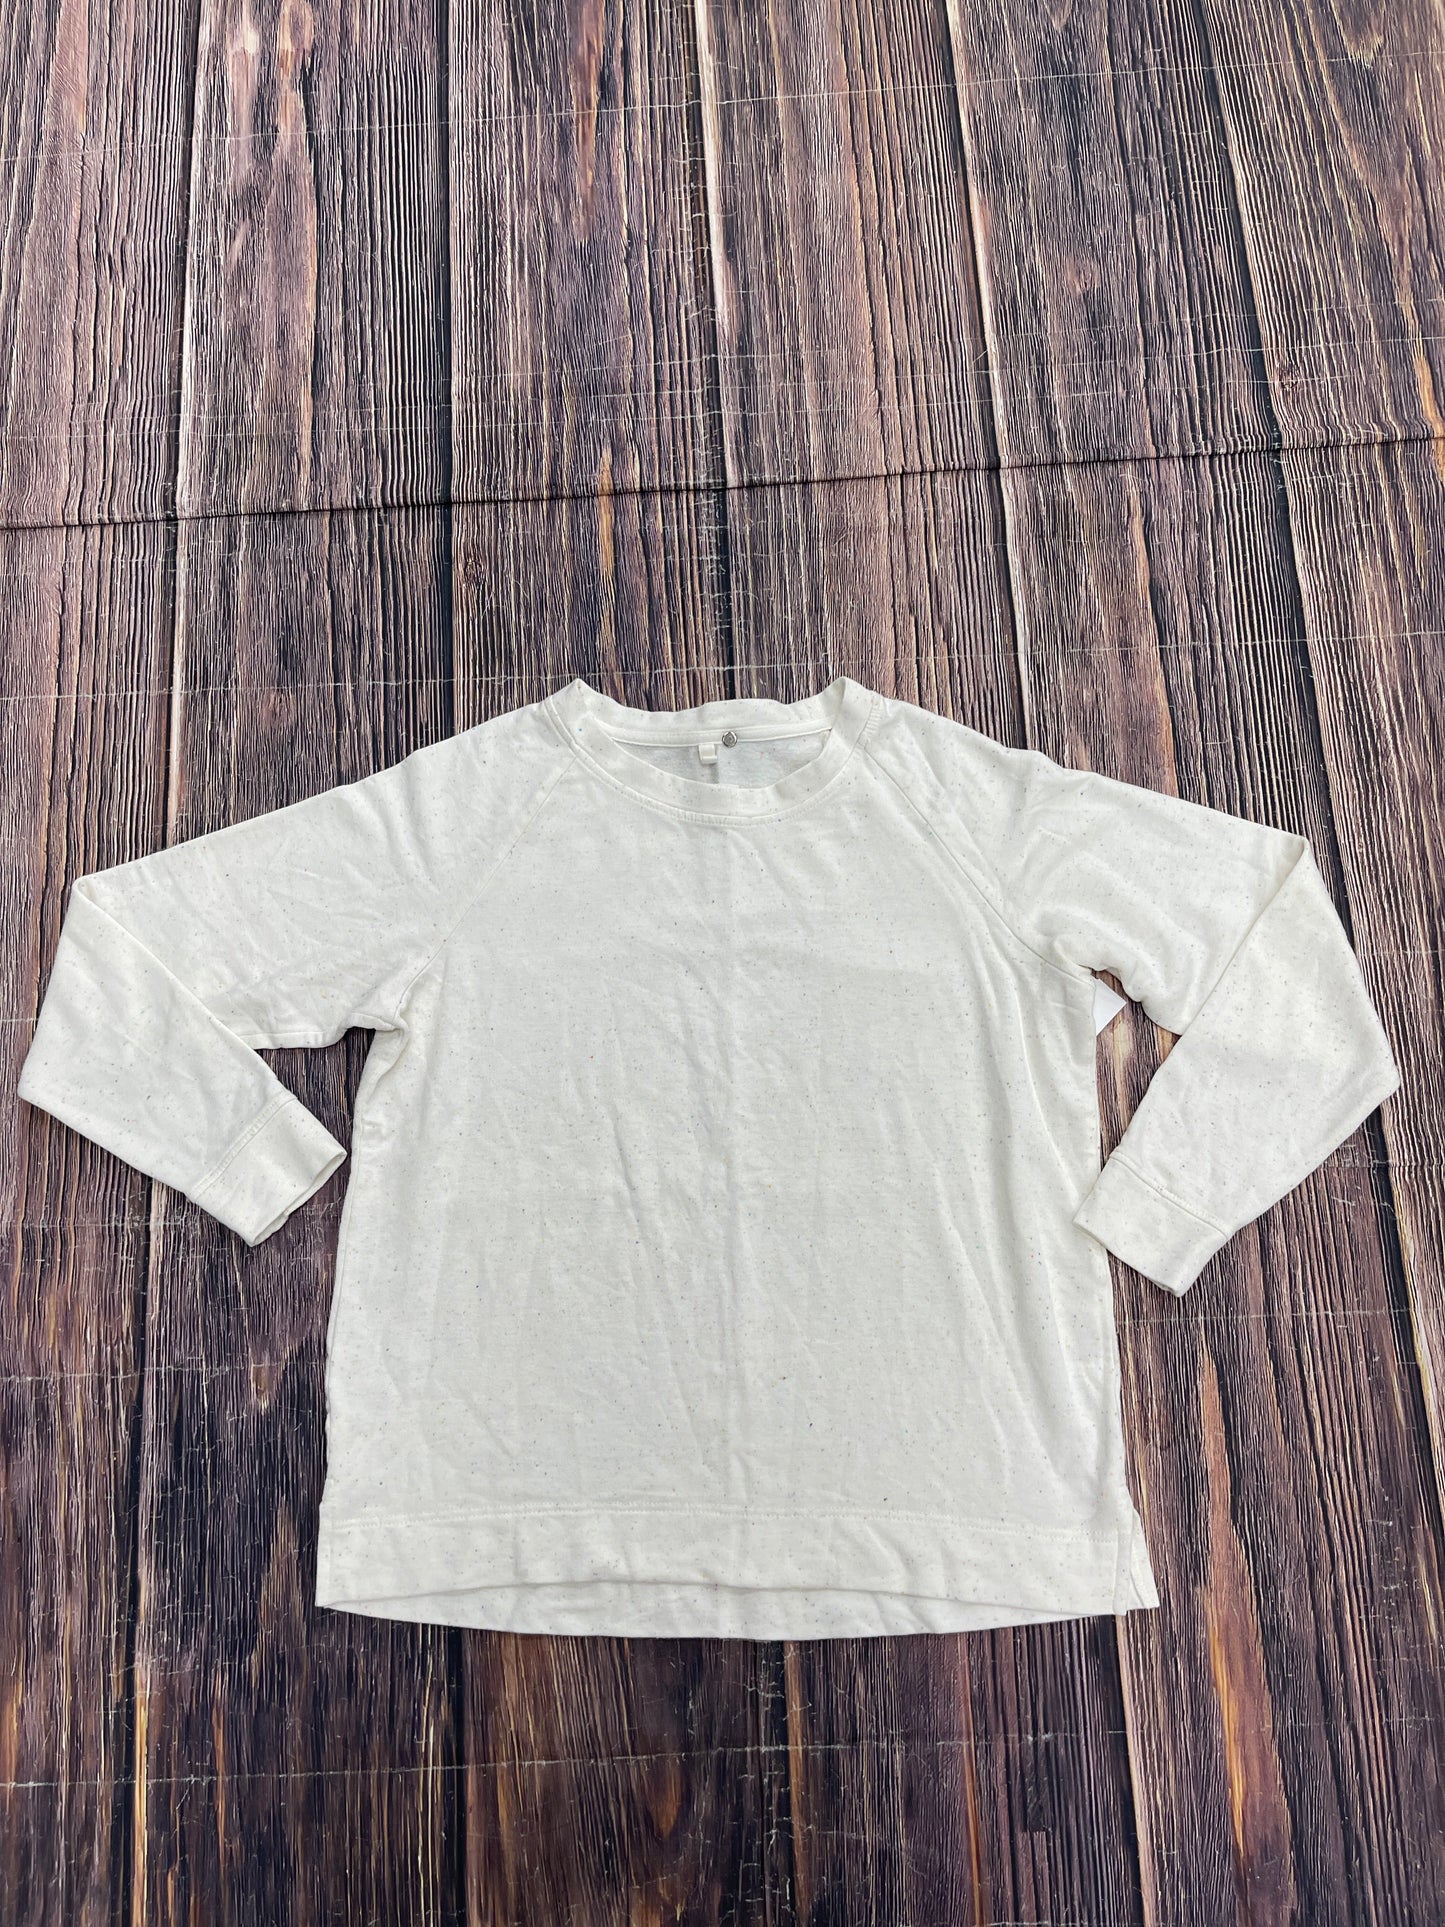 White Top Long Sleeve Lou And Grey, Size M